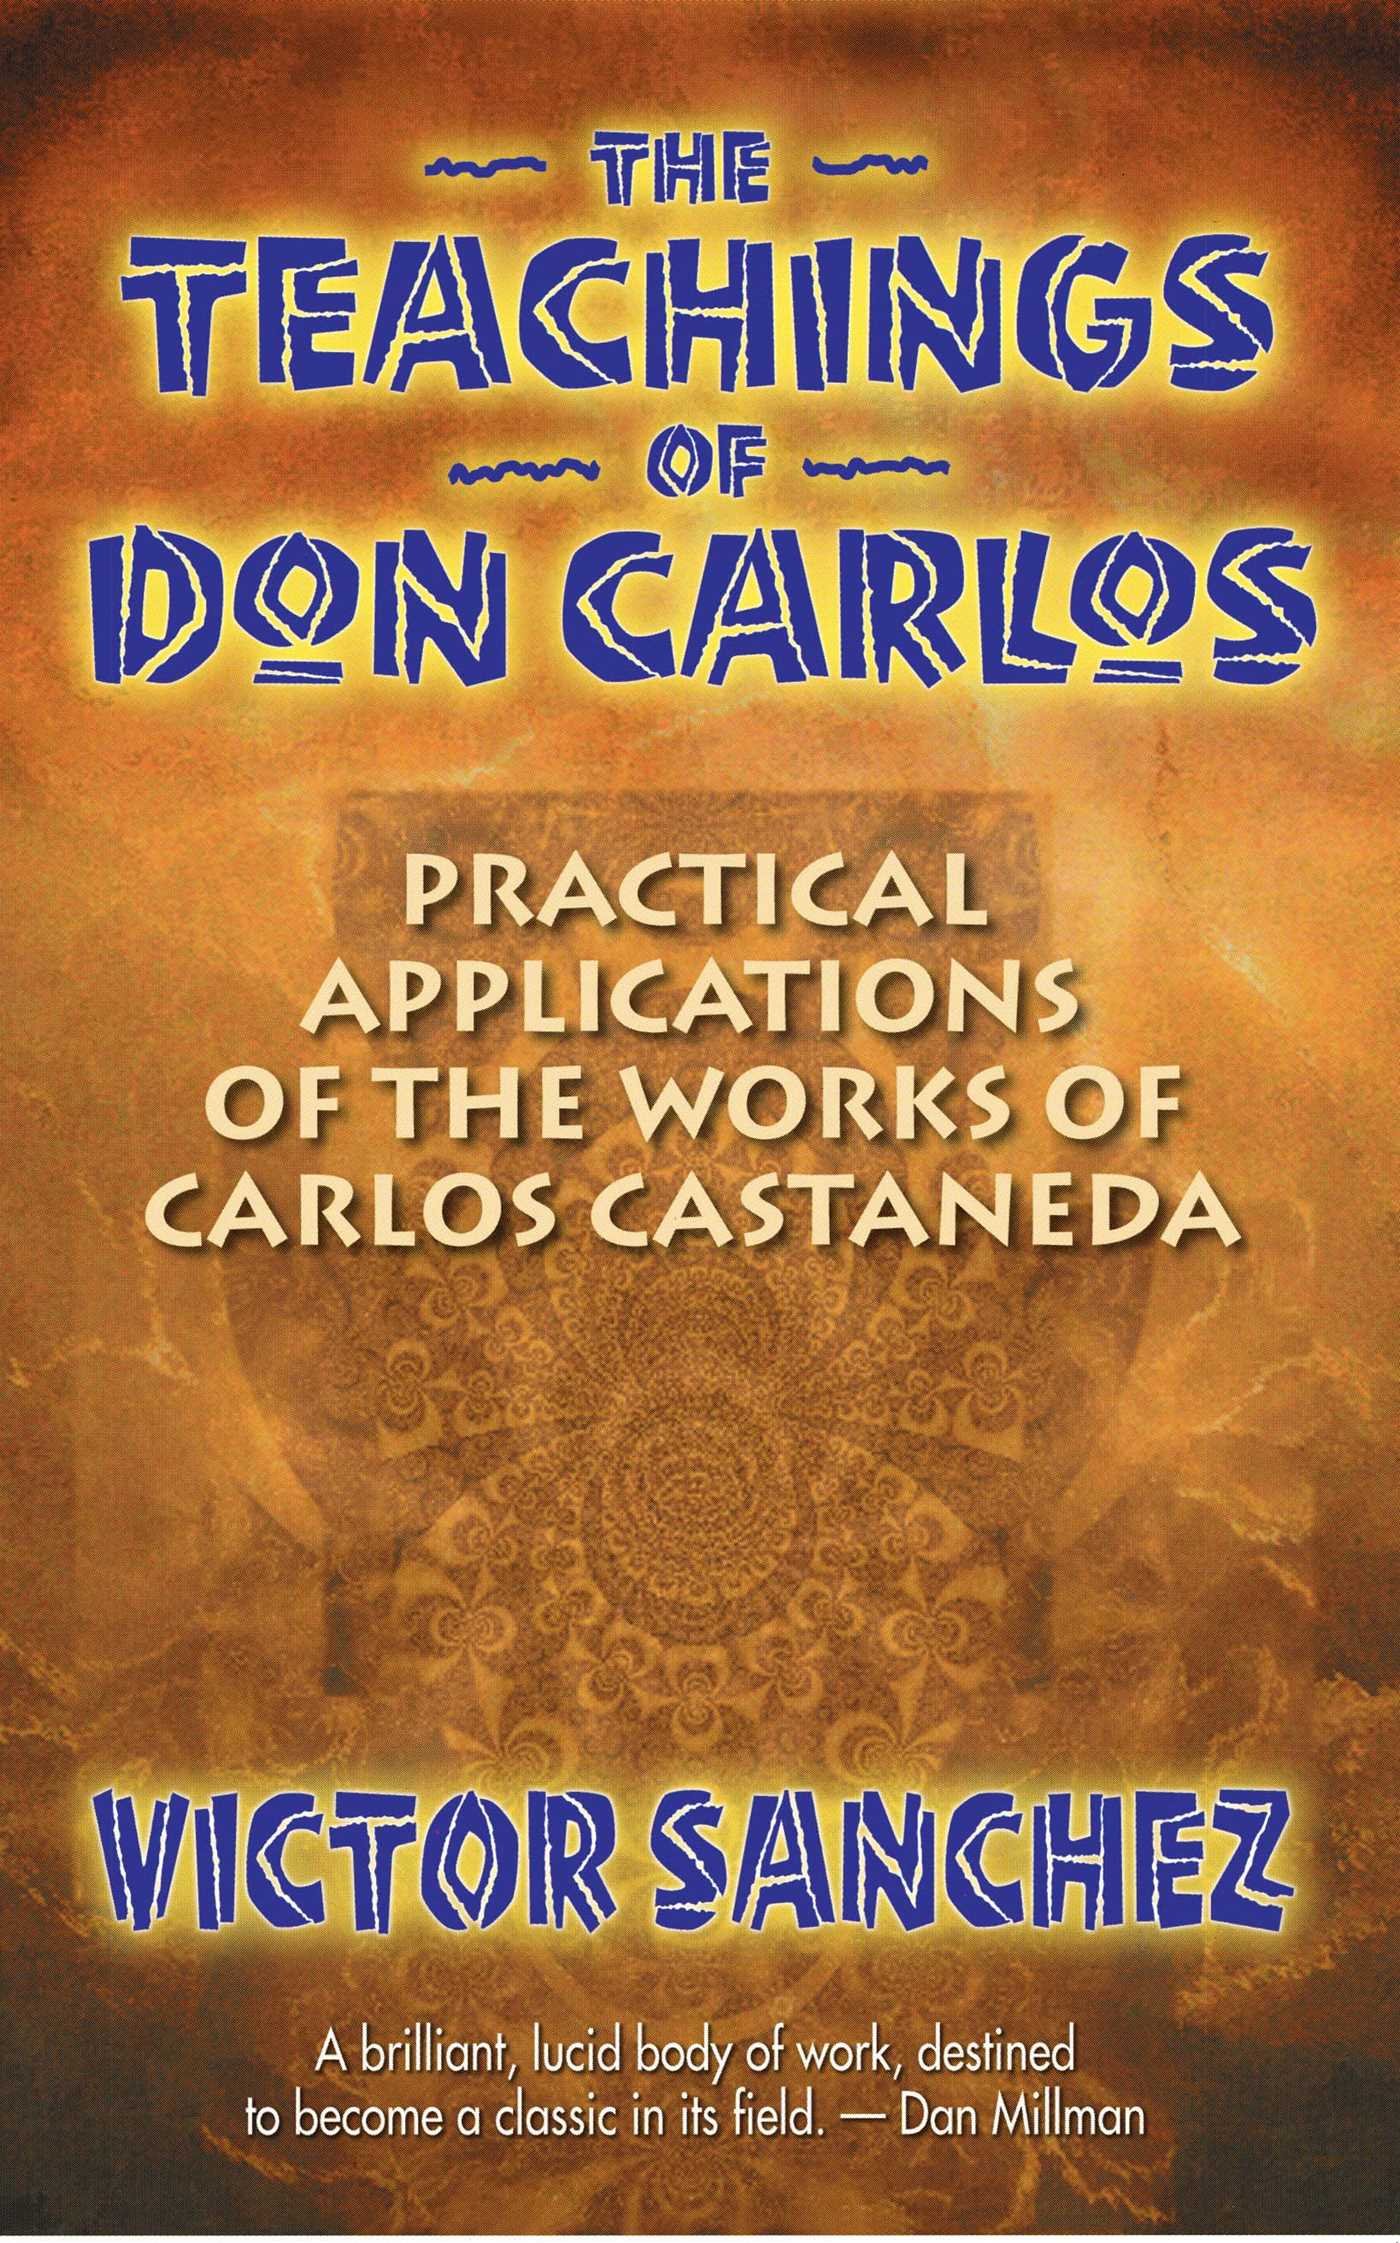 The Teachings of Don Carlos: Practical Applications of the Works of Carlos Castaneda (Copy) (Copy)